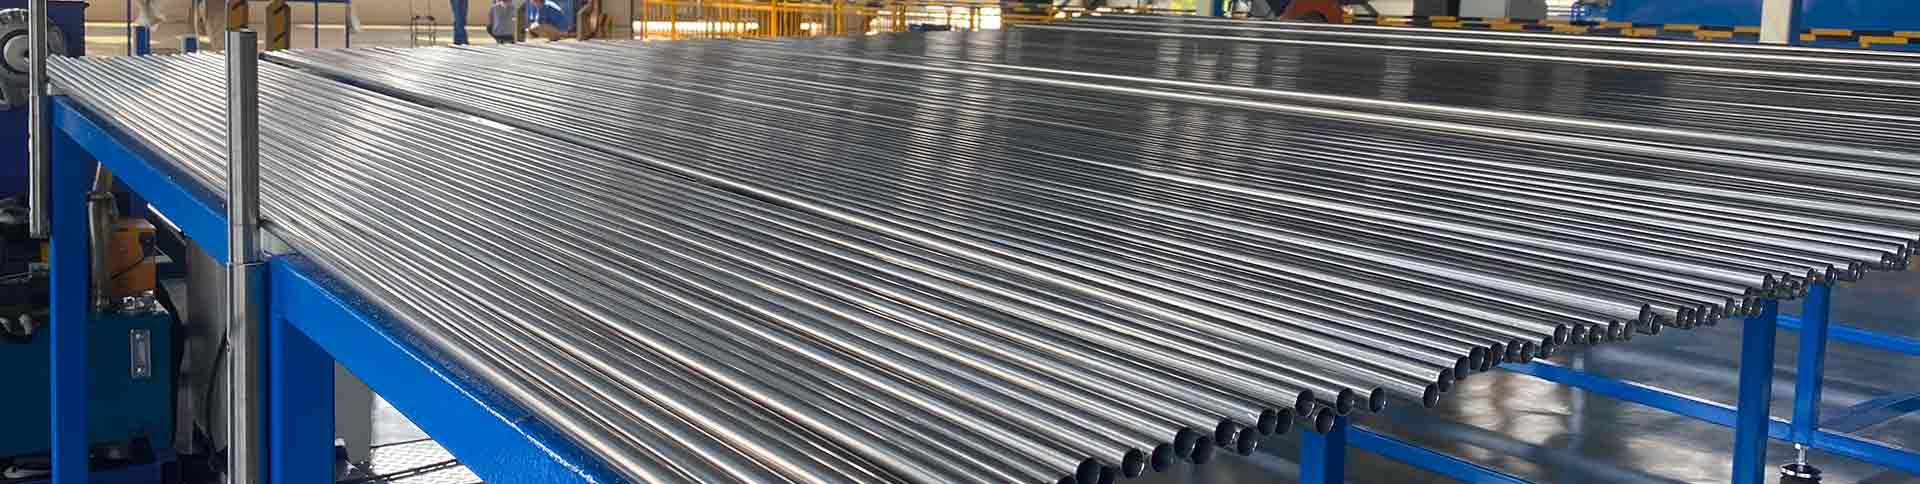 How to cut stainless steel tube?